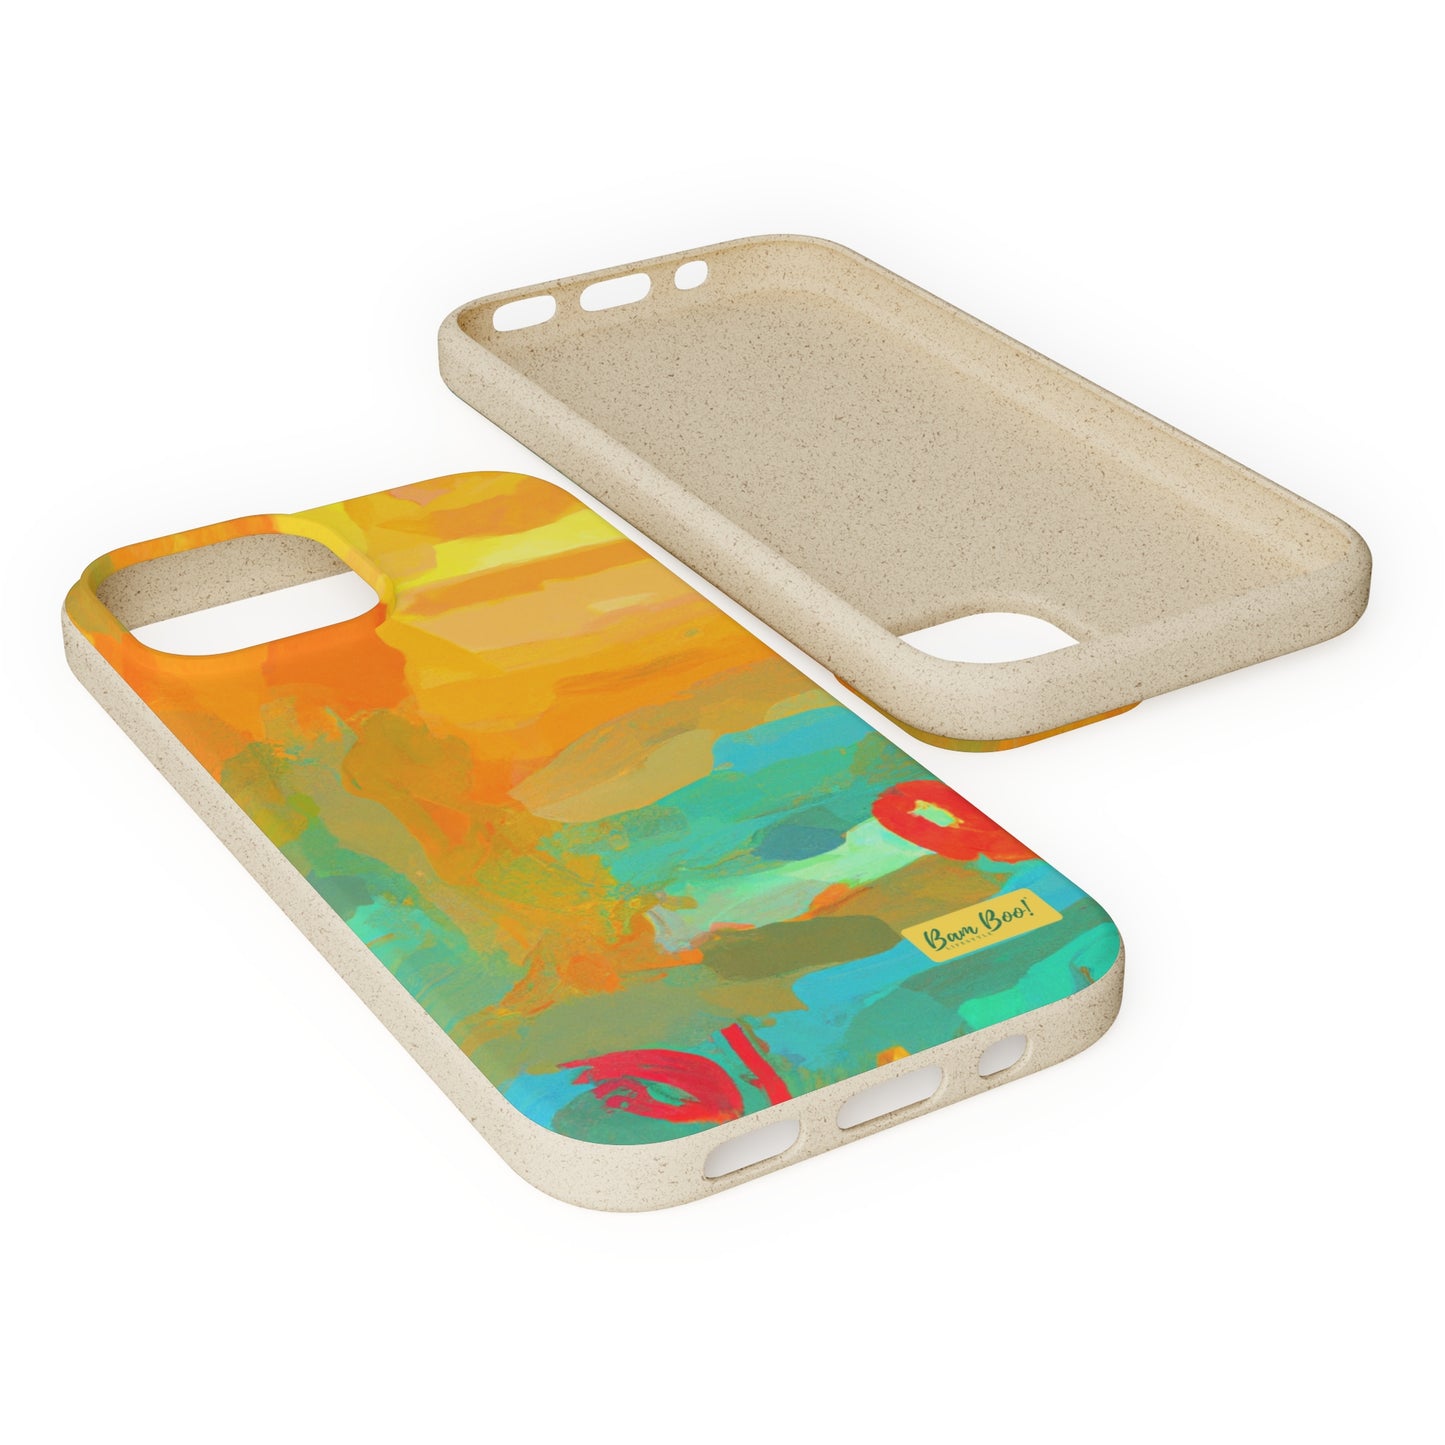 "An Ode to Nature: An Abstract Painting Journey" - Bam Boo! Lifestyle Eco-friendly Cases